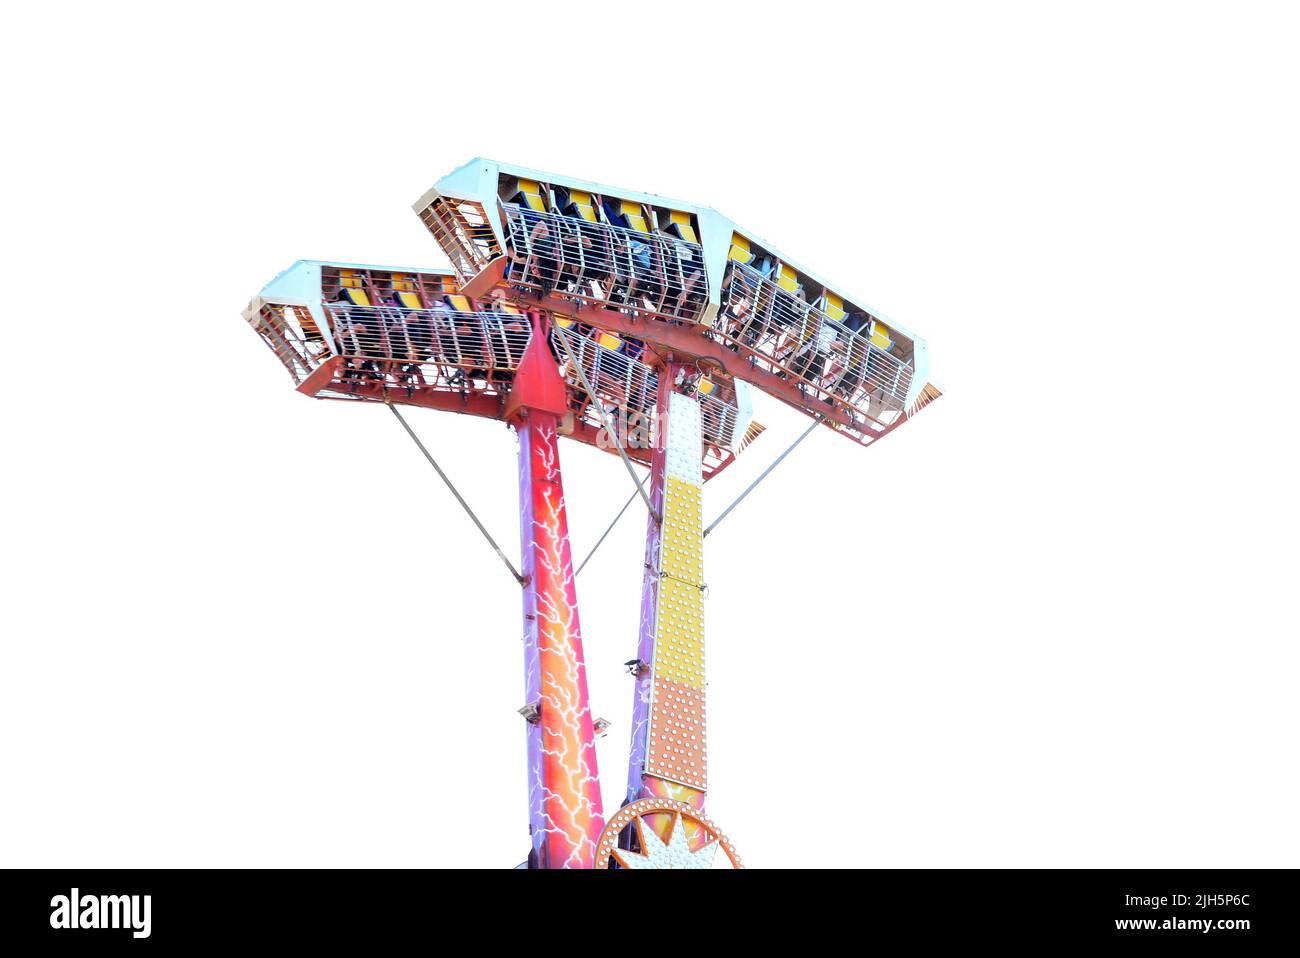 Radical toy enclosed in an amusement park where the participant stands upside down, Brazil, extreme toys Stock Photo